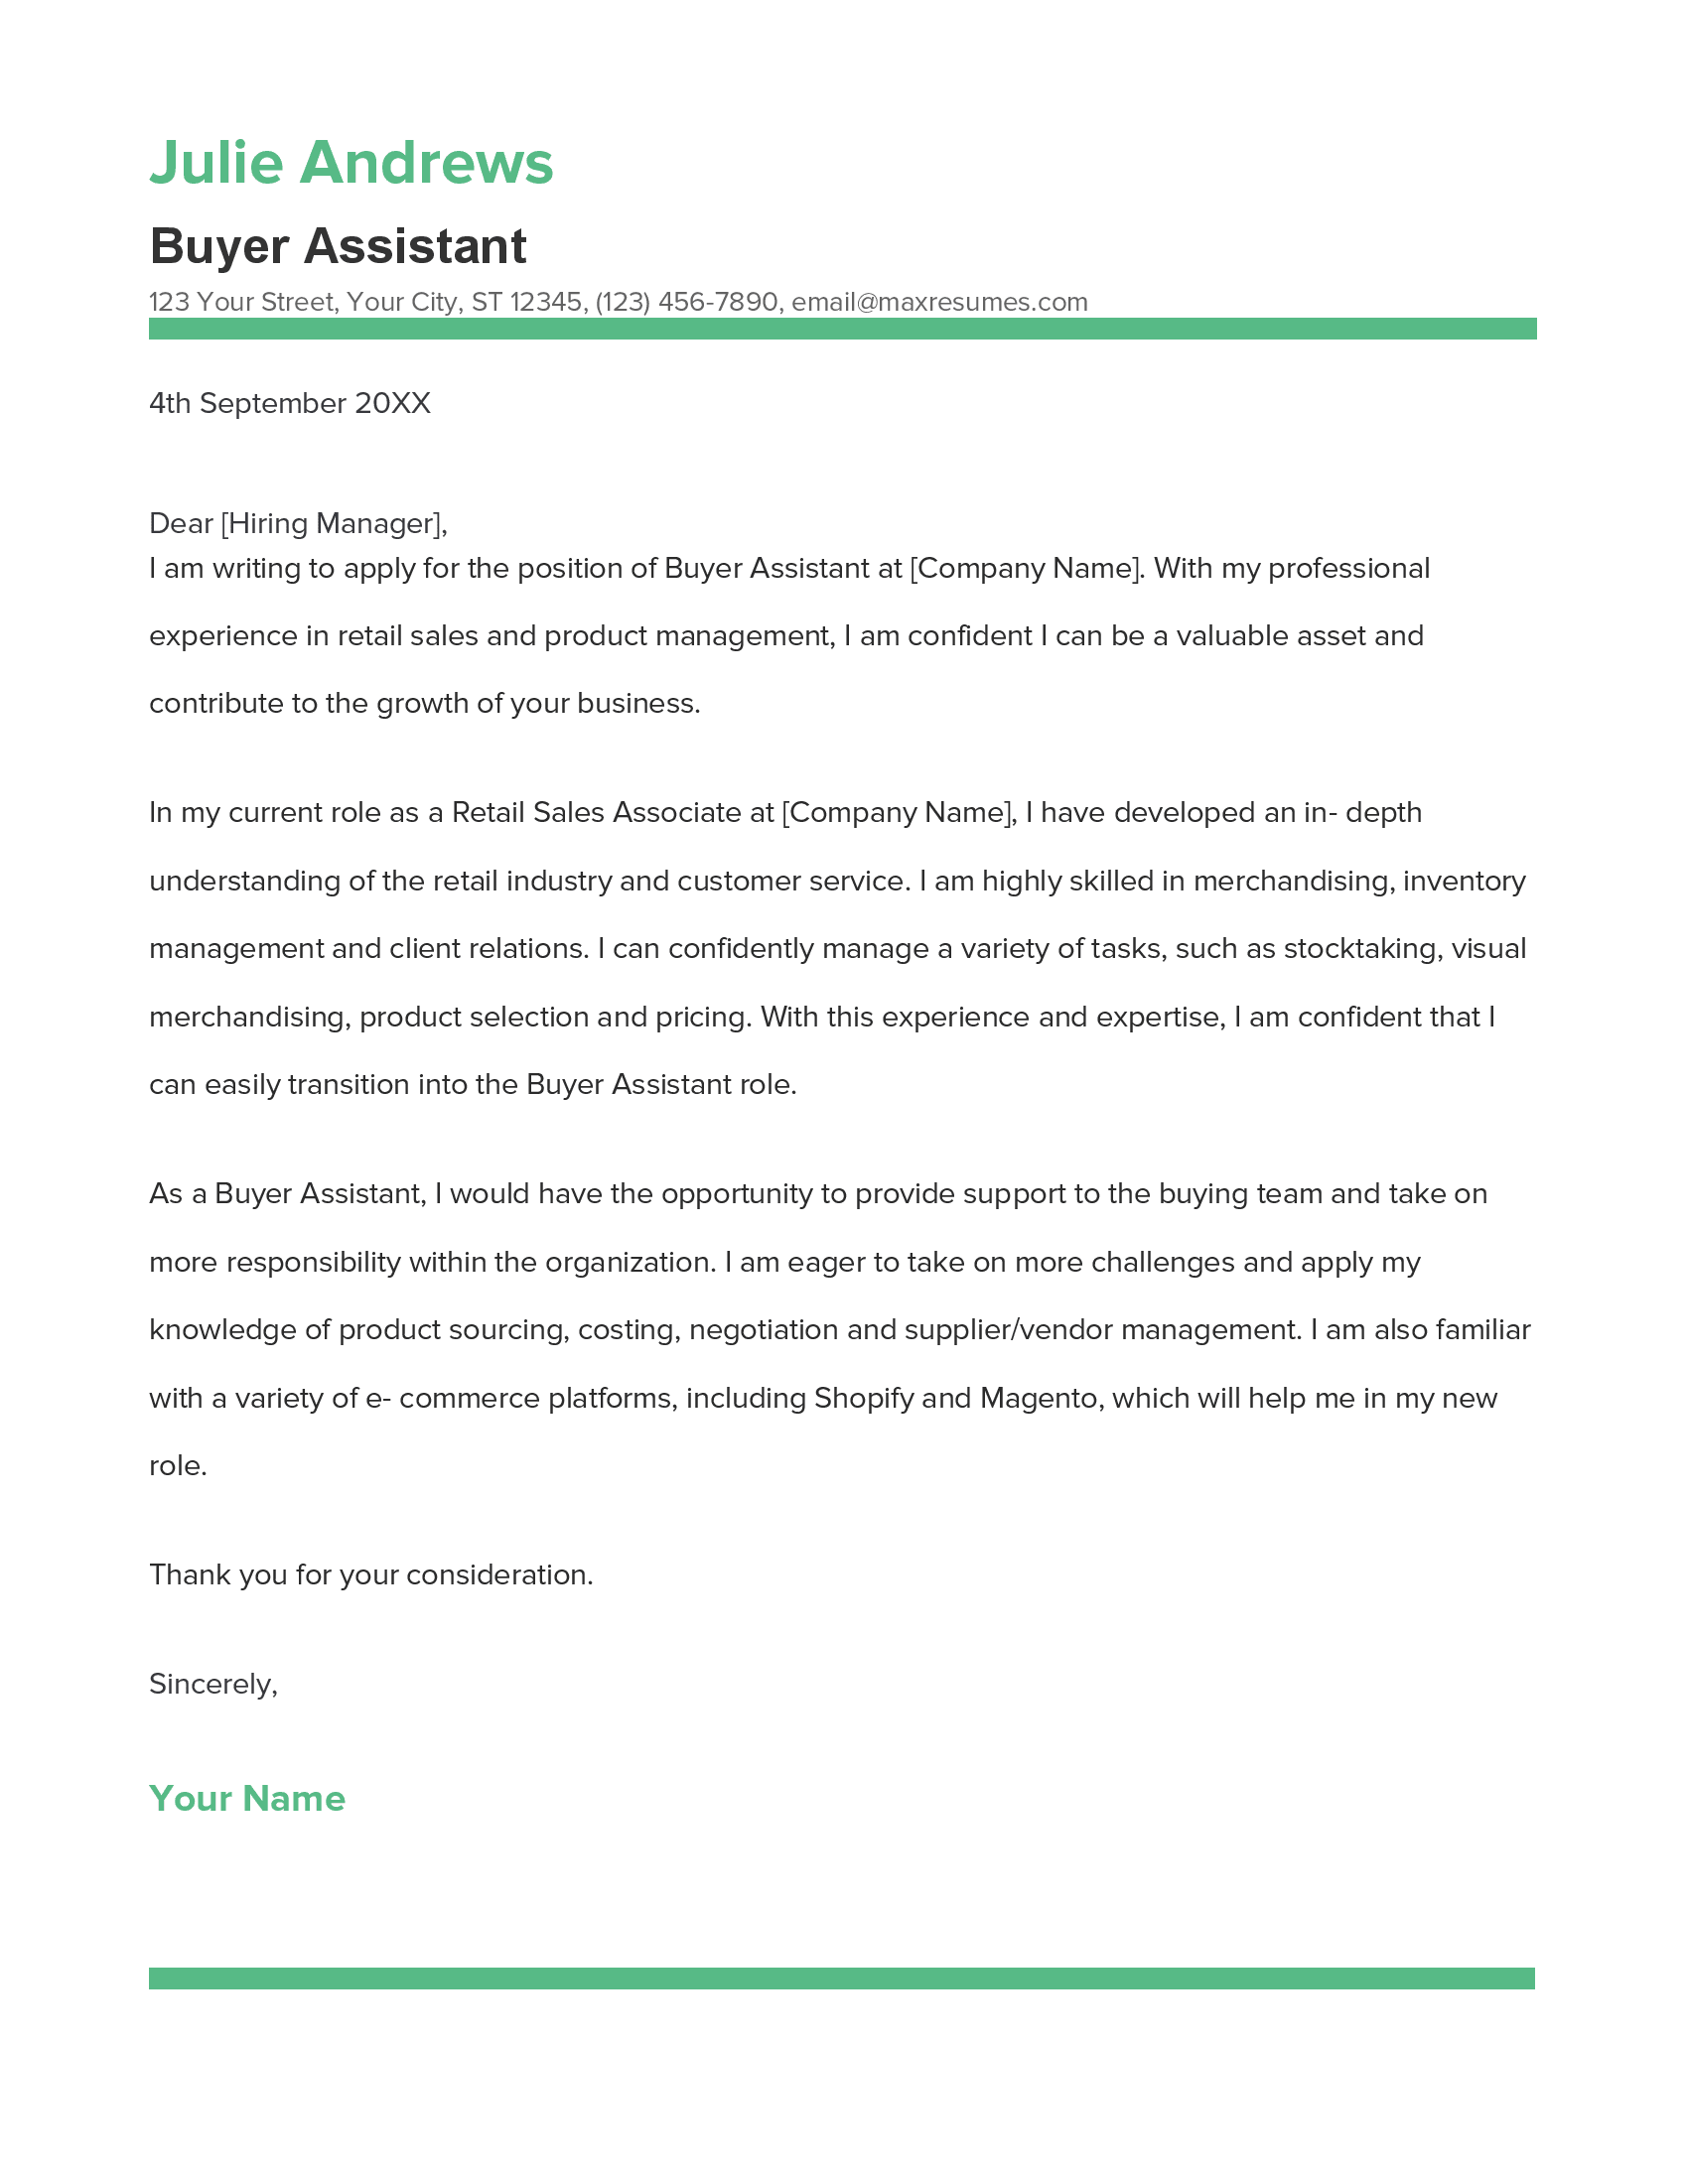 Buyer Assistant Cover Letter Example